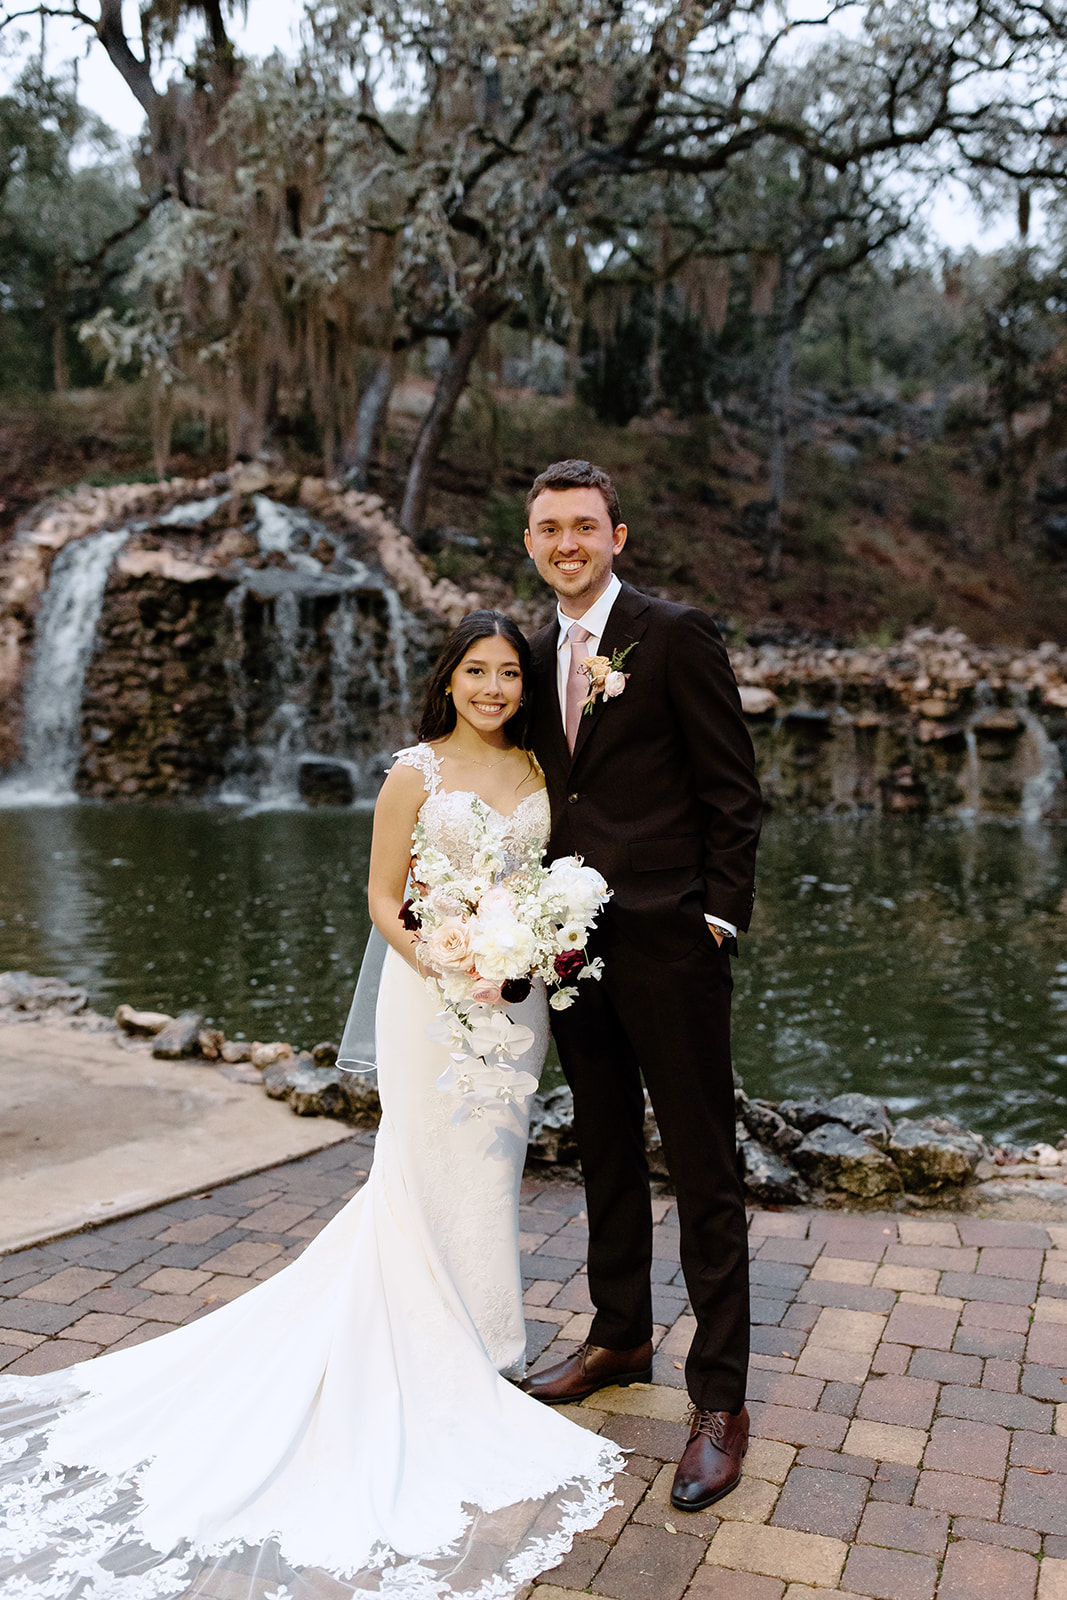 Bride and groom in front of a waterfall